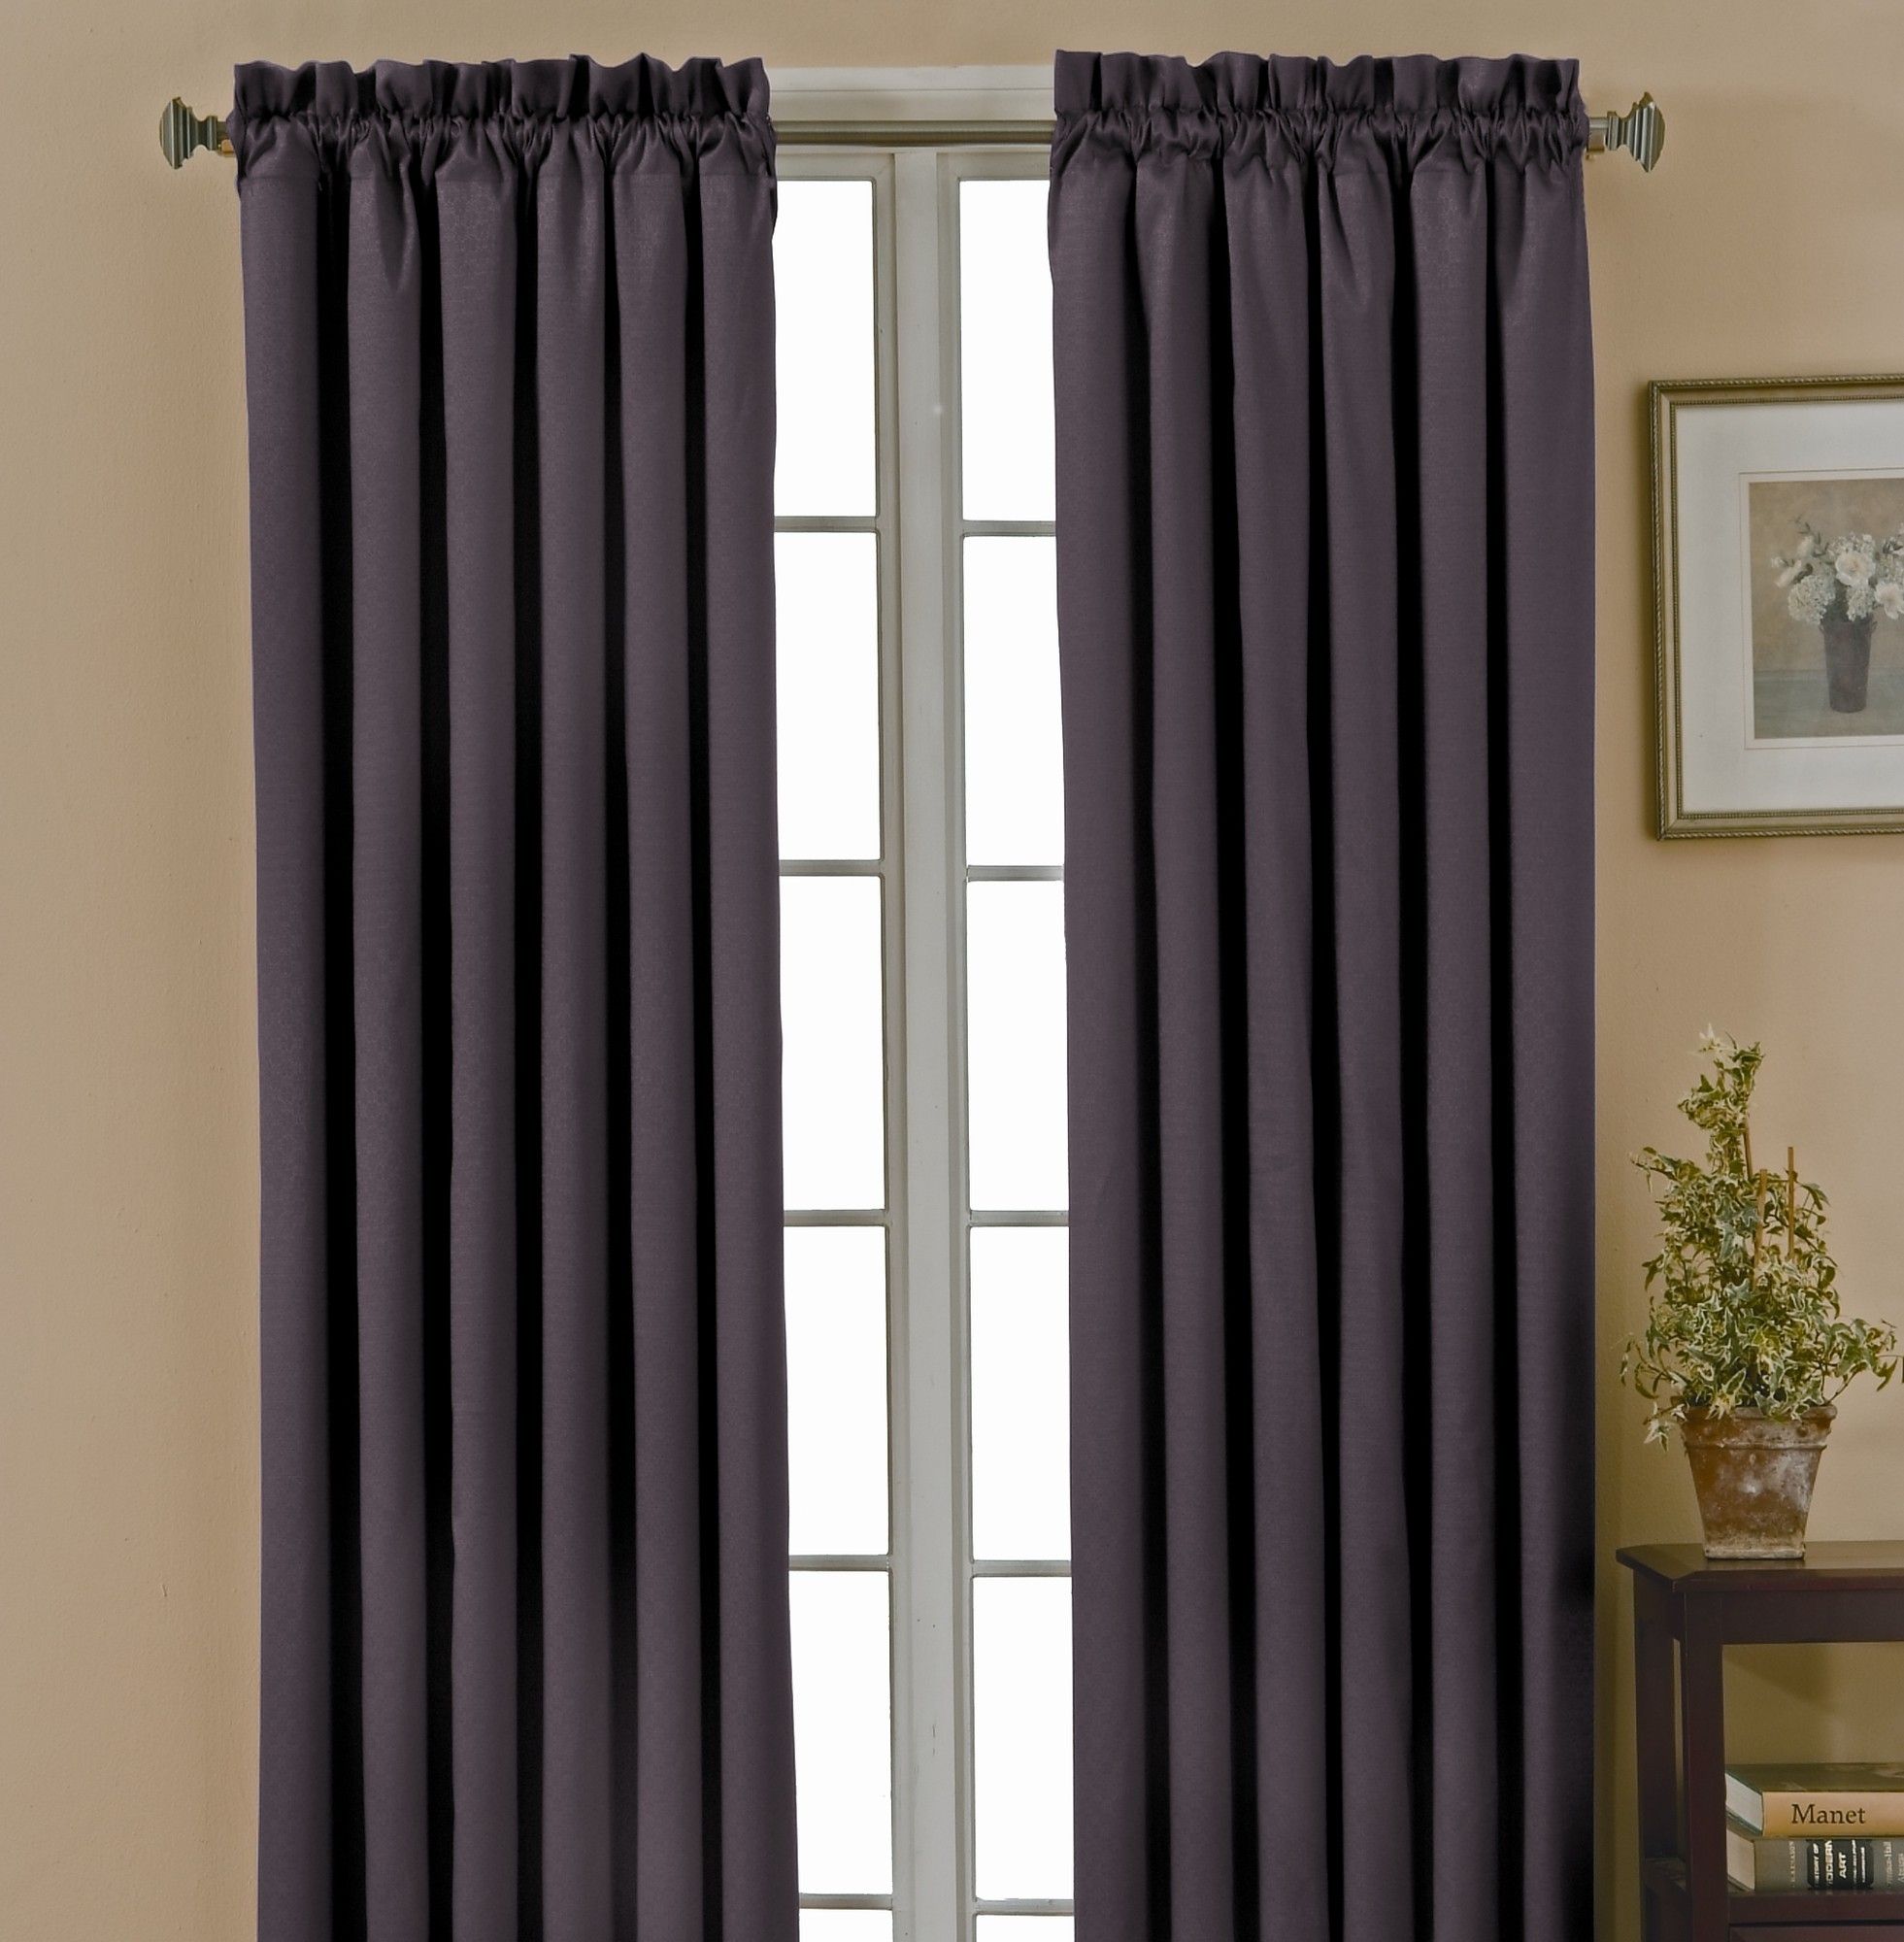 Blackout Curtain Also With A Blackout Lining Curtains Also With A Regarding White Thick Curtains (View 15 of 15)